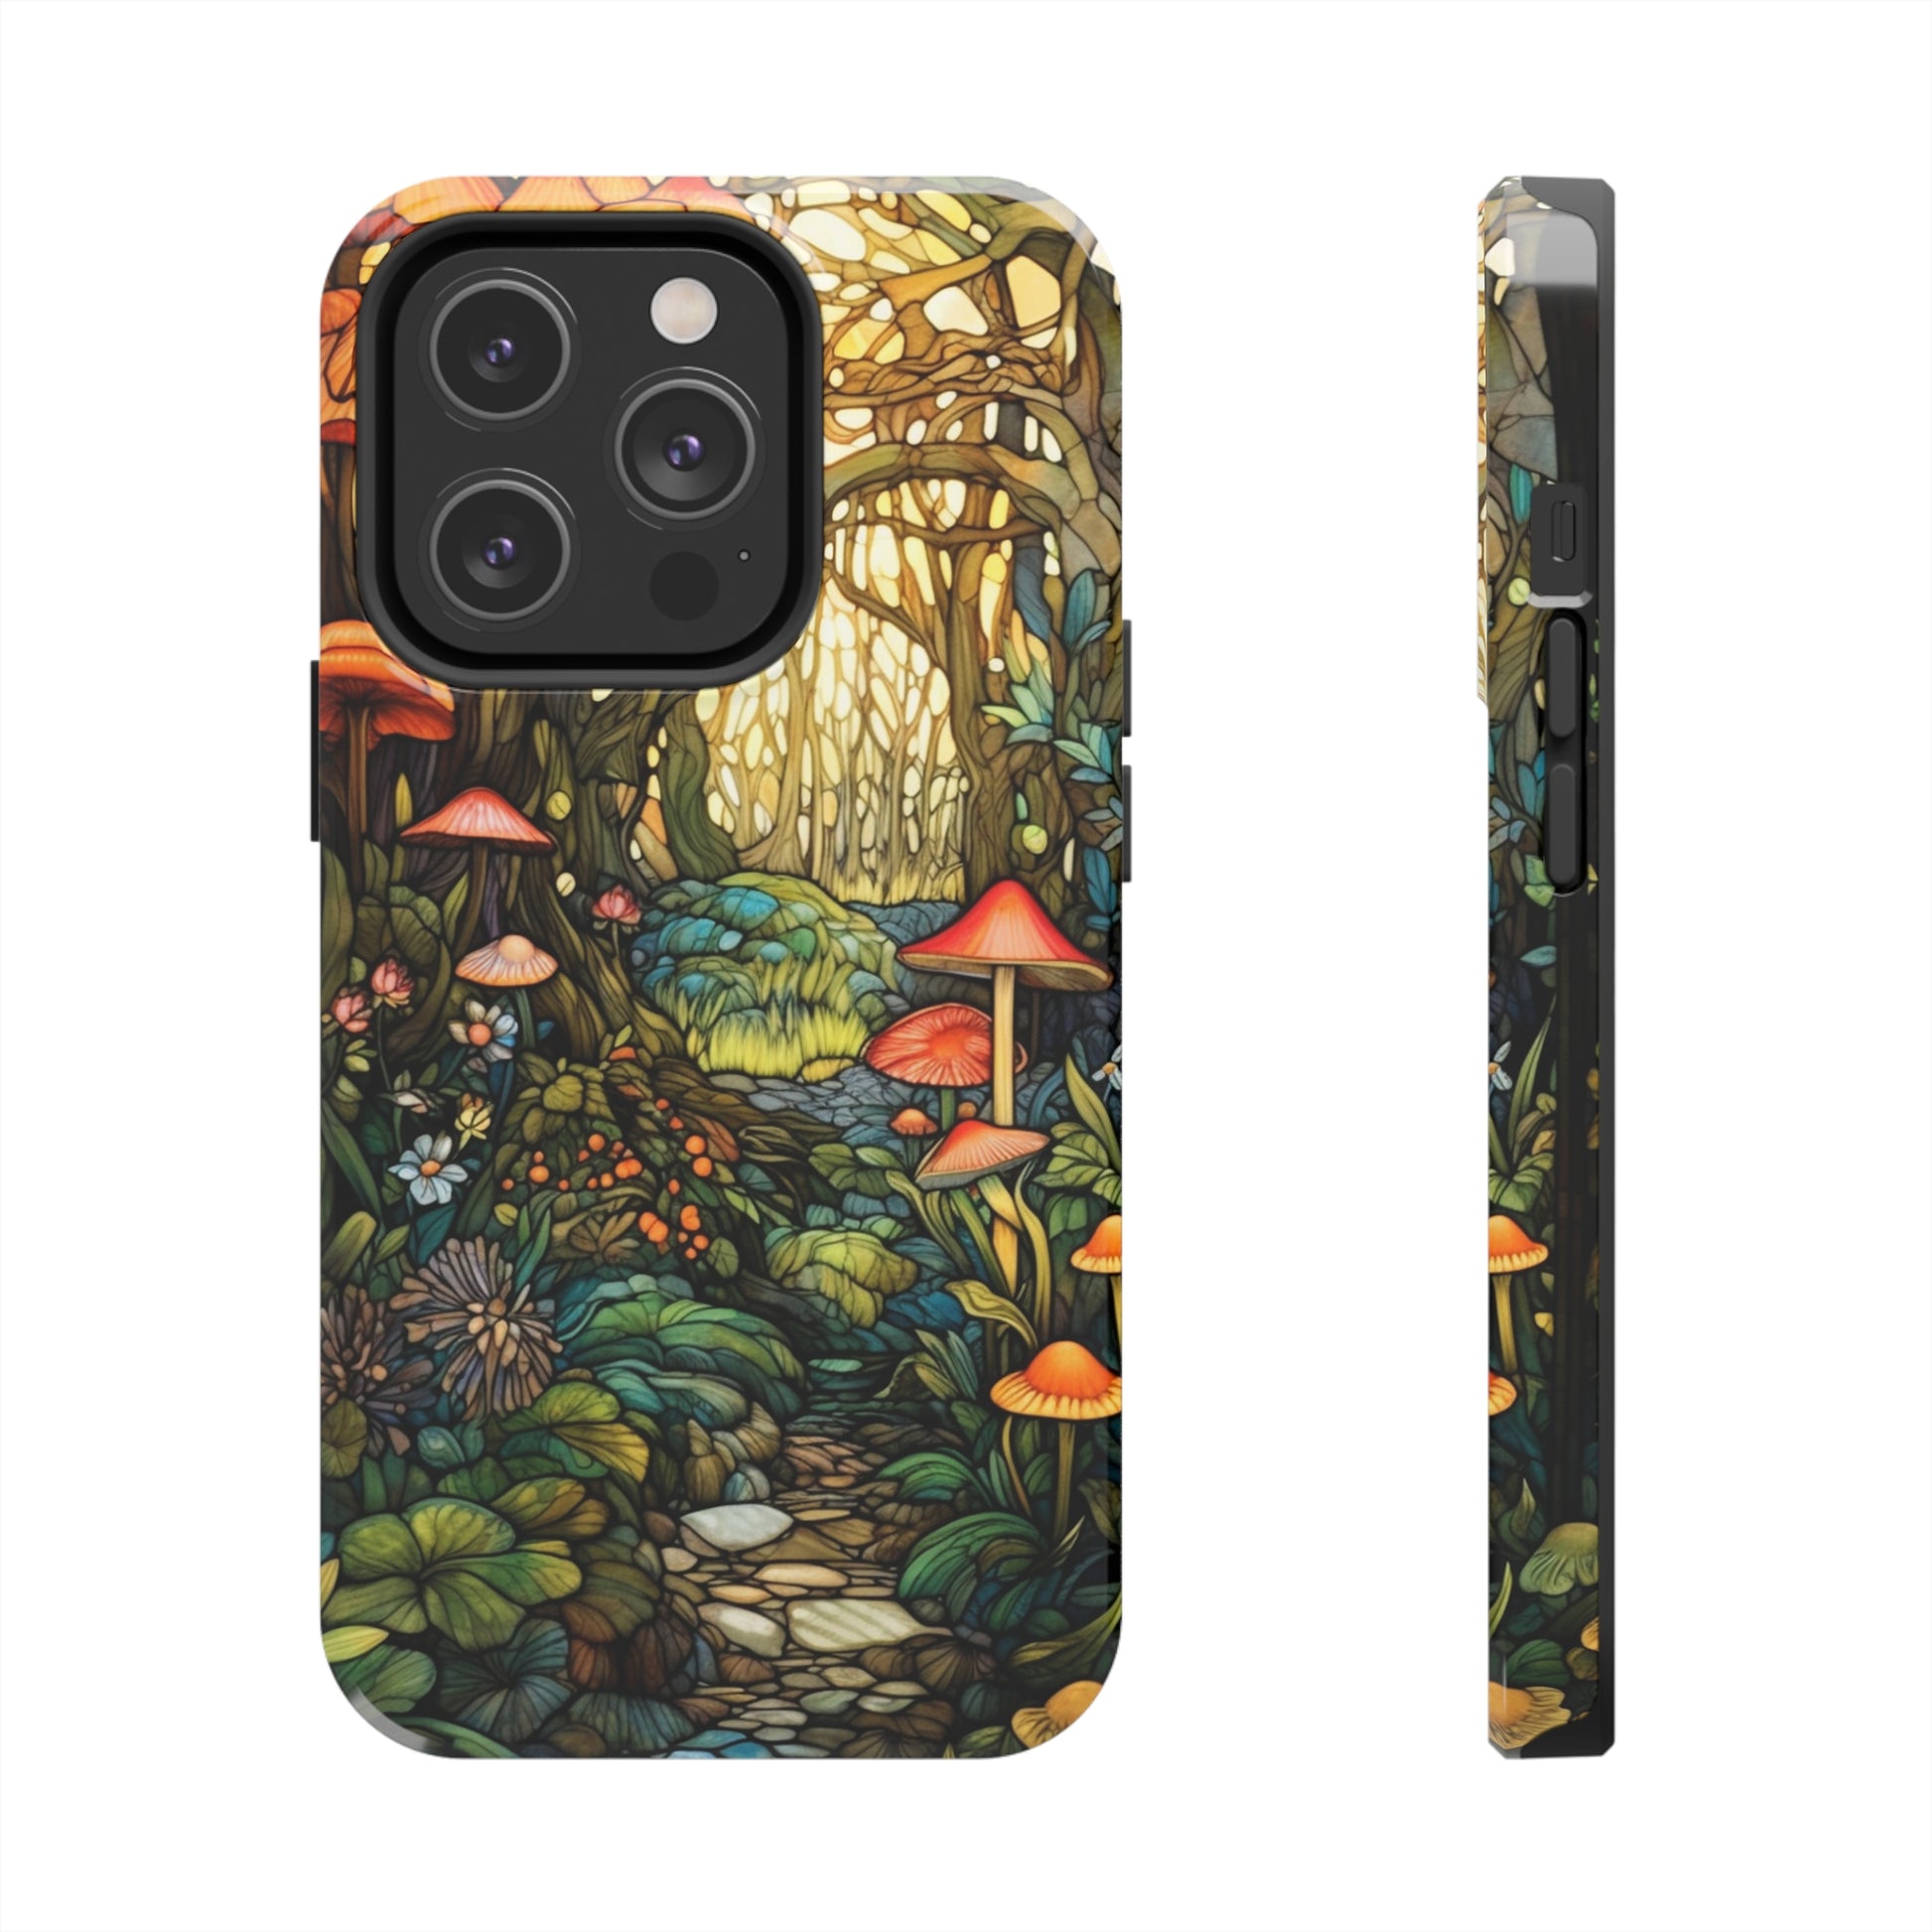 Bohemian-Inspired iPhone Protective Case with Nature's Charm